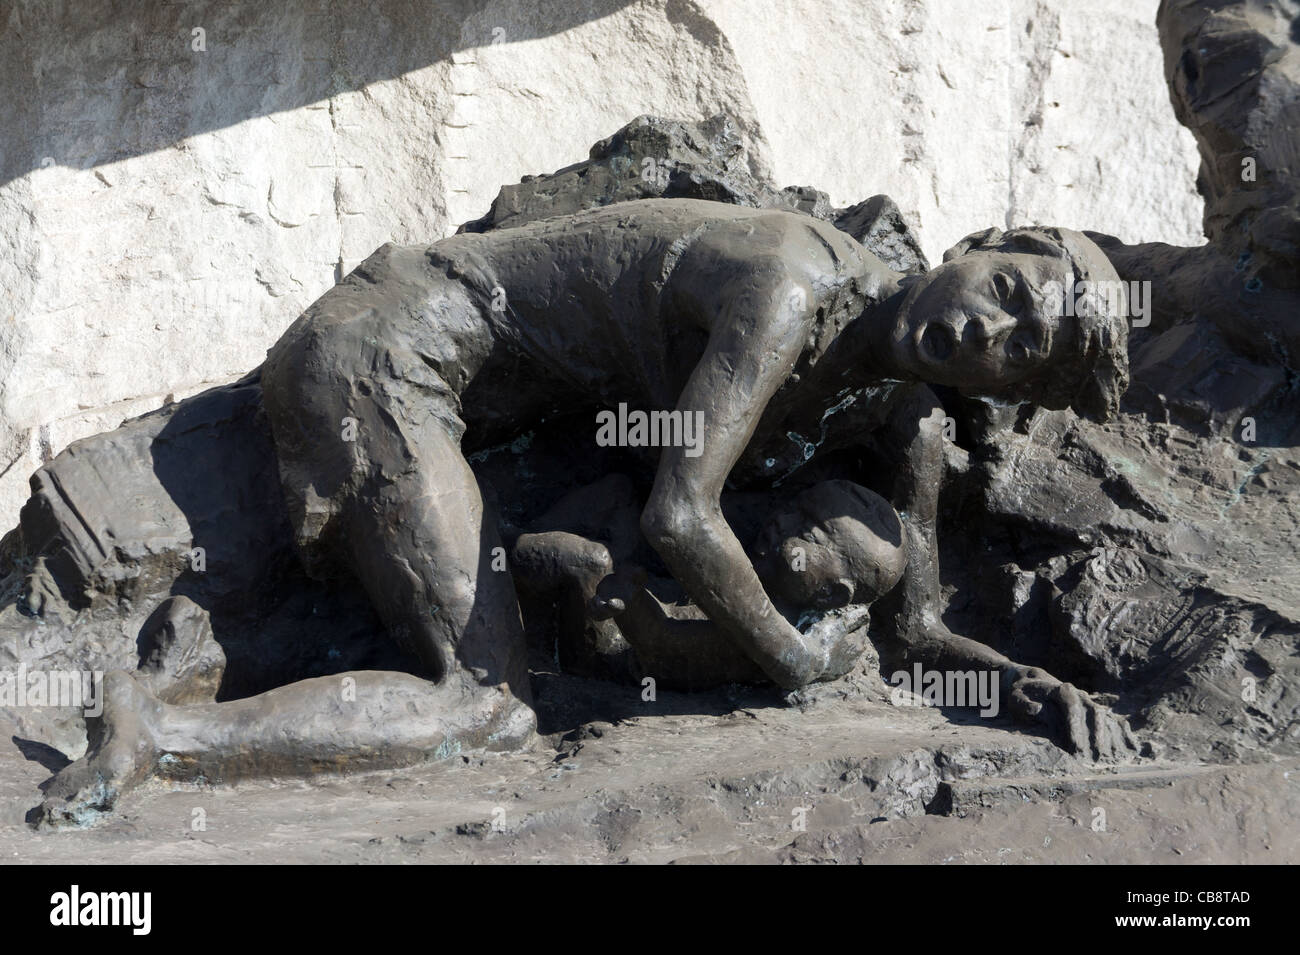 Sculpture of mother and child, Tangshan Earthquake Memorial, Tangshan, China Stock Photo